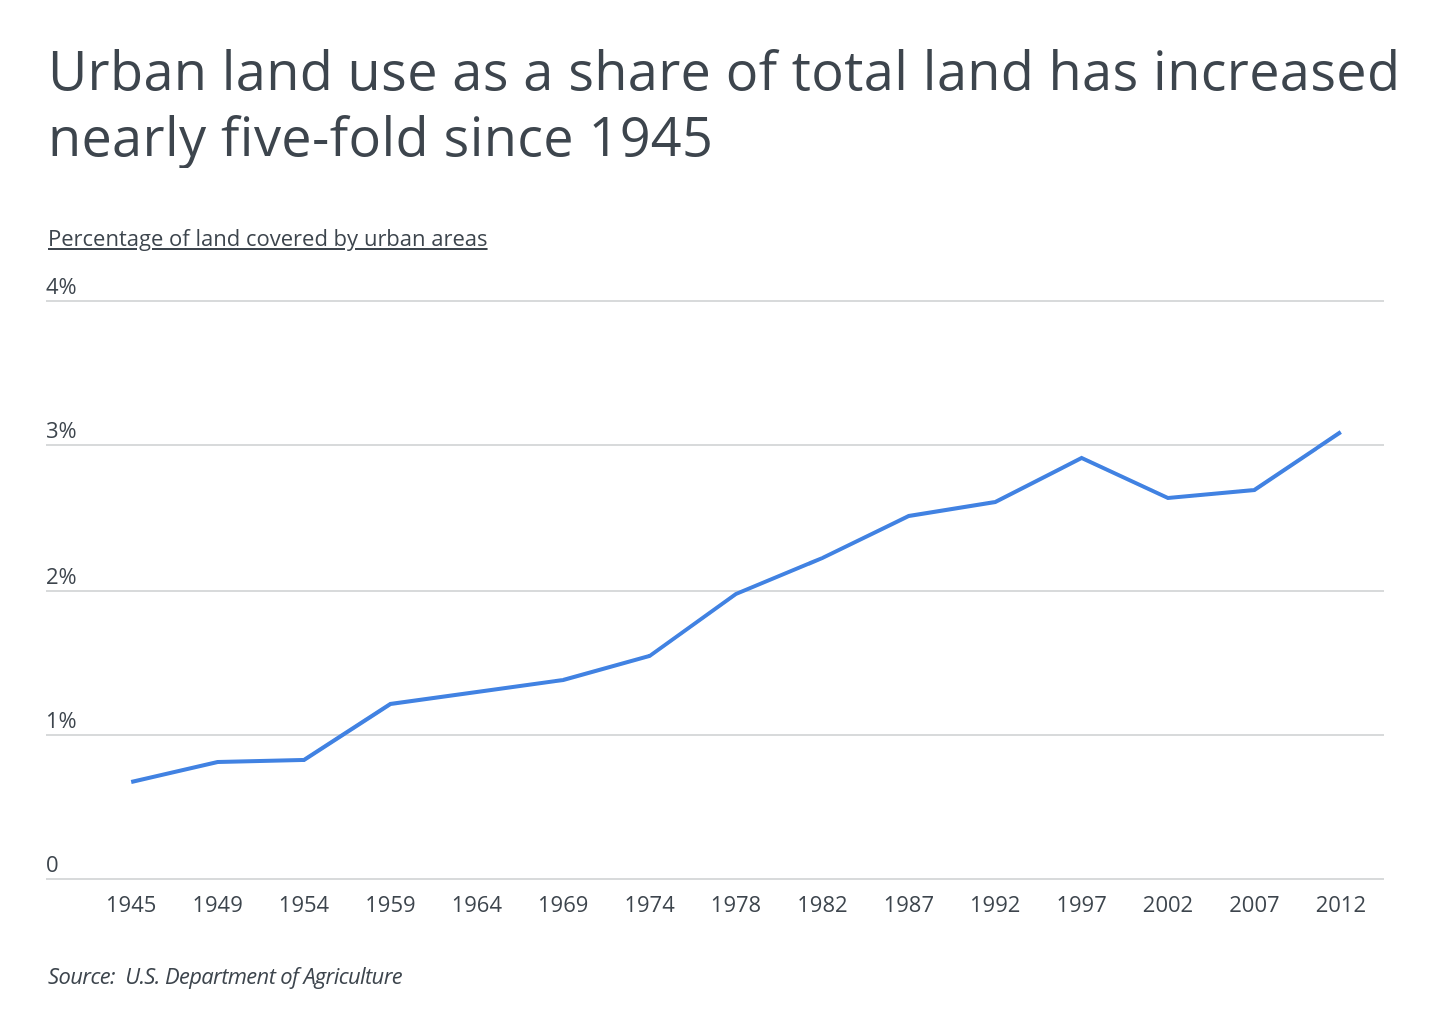 Urban land use as a share of total land has increased nearly five-fold since 1945